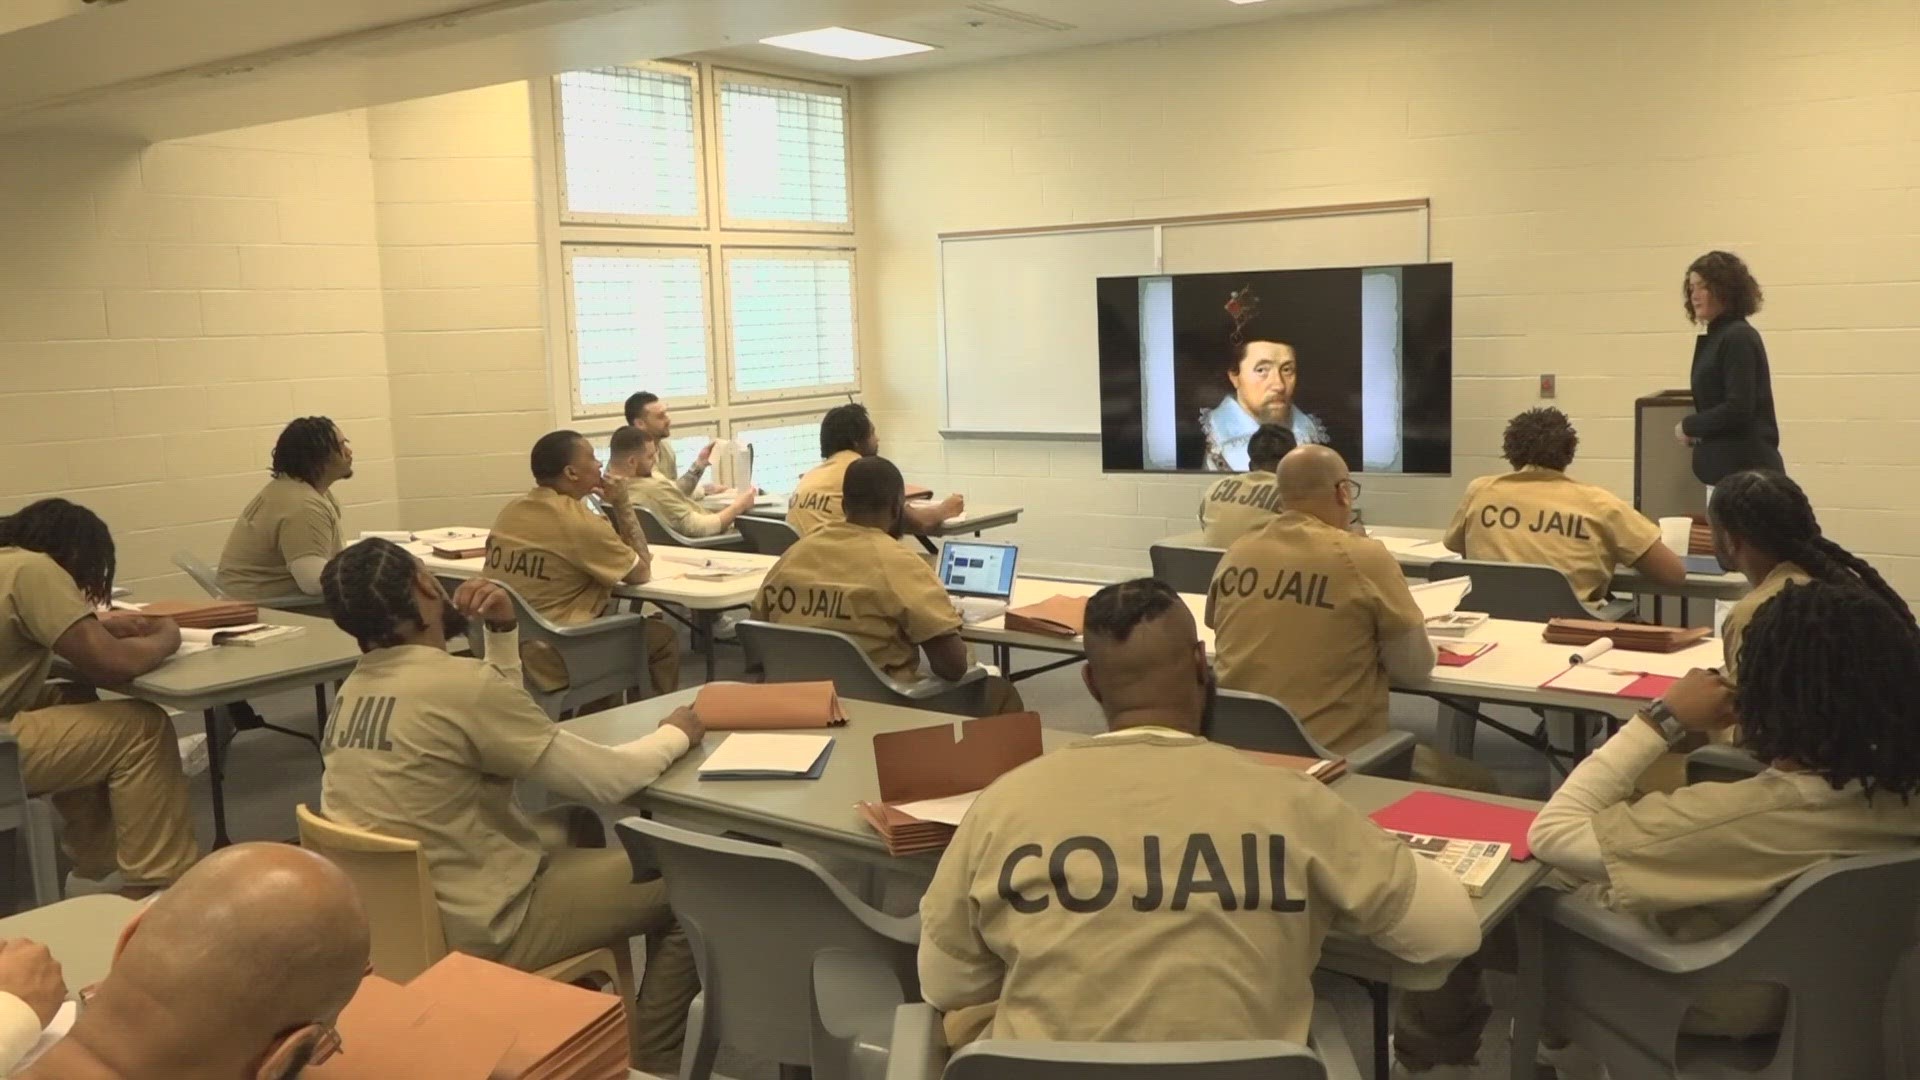 Inmates at the St. Louis County Jail are able to take college classes through the PACE program. It's through St. Louis Community College.